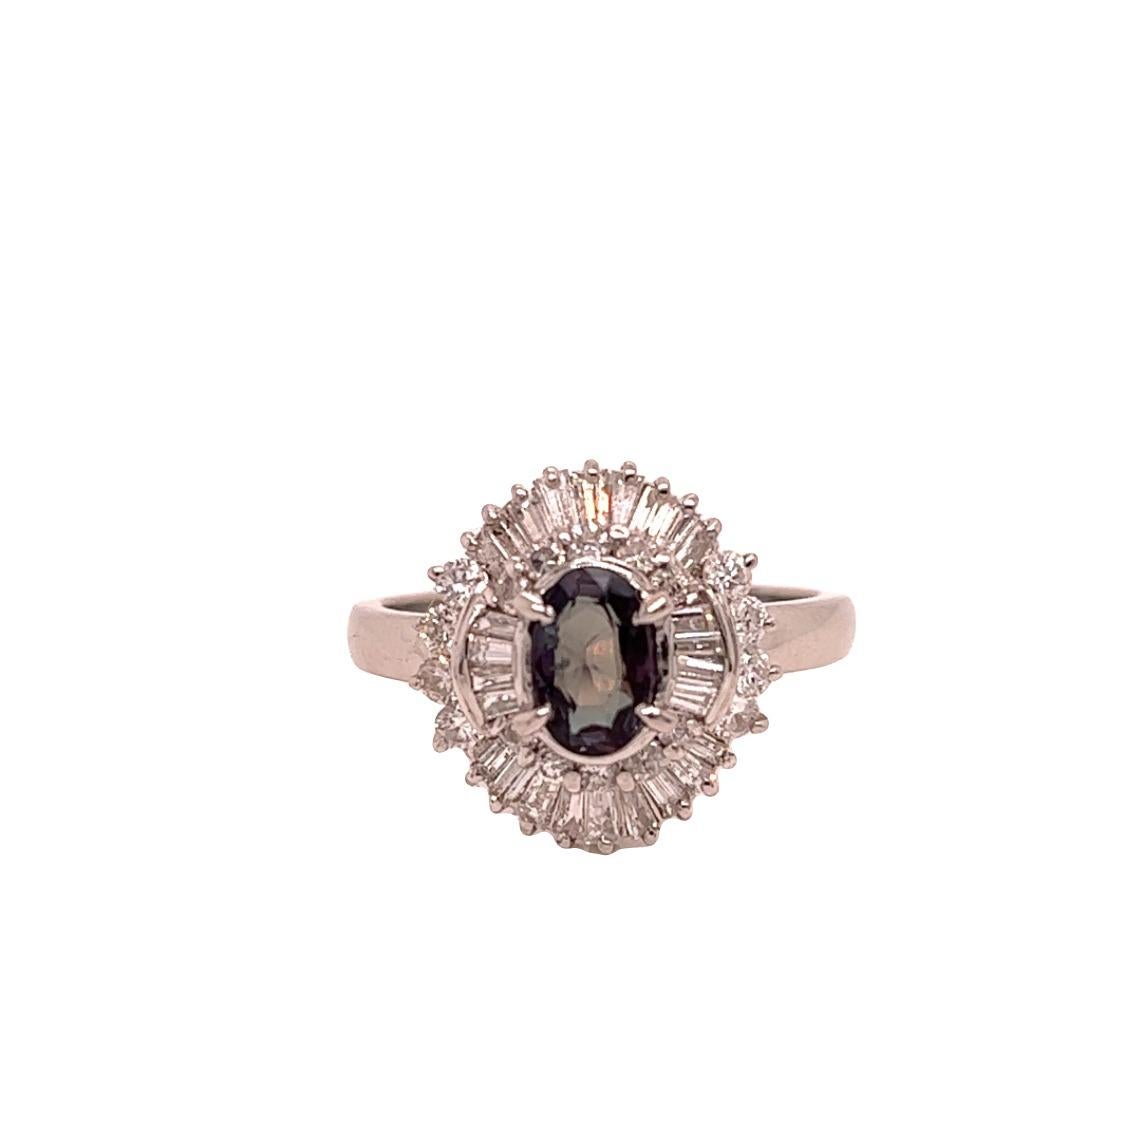 This is a gorgeous natural AAA quality oval Alexandrite surrounded by dainty diamonds that are set in a vintage platinum setting. This ring features a natural 0.75 oval alexandrite that is certified by the Gemological Institute of America (GIA) and